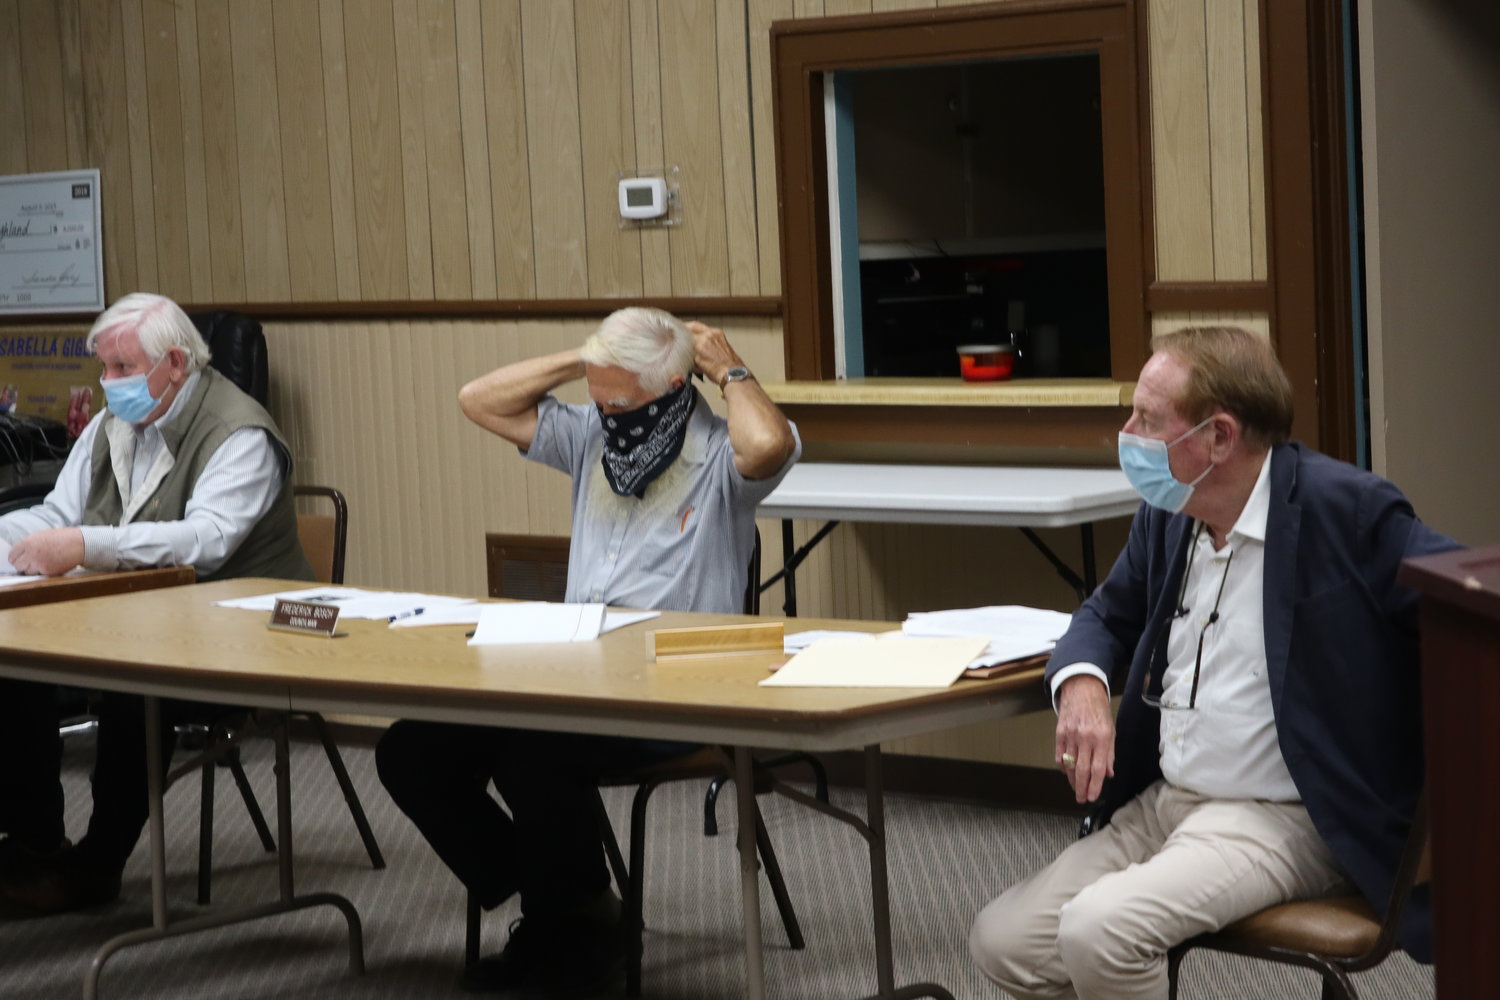 As soon as the Highland Town Board passed the motion to require masks for town employees and highly suggest that people wear masks in town buildings, board members whipped out their masks and put them on.